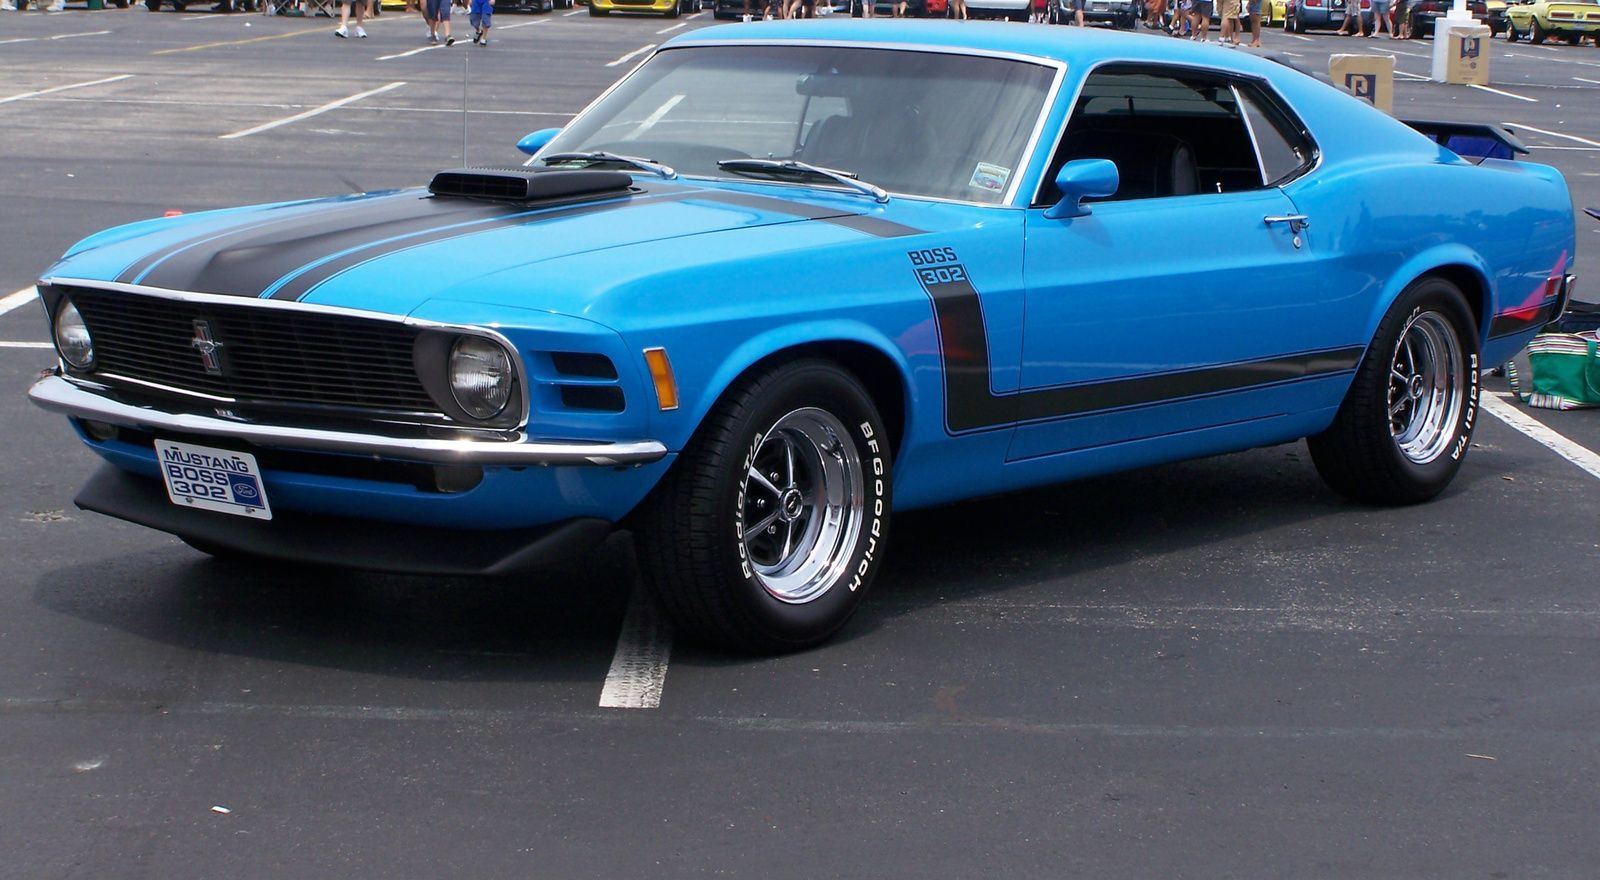 What Is The Grabber Blue Mustang? - What Is The Grabber Blue Mustang?